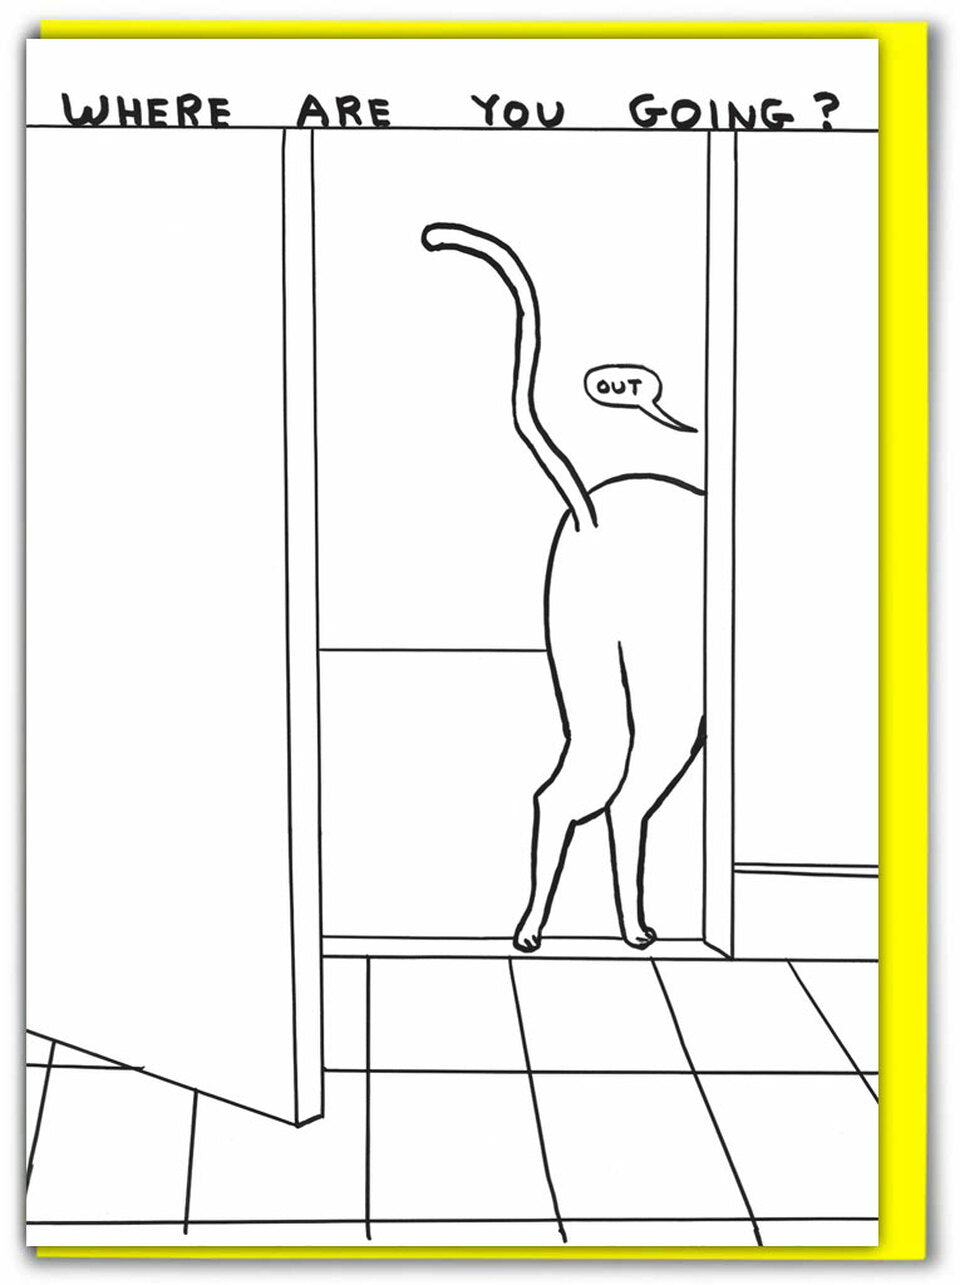 WHERE ARE YOU GOING Card by David Shrigley